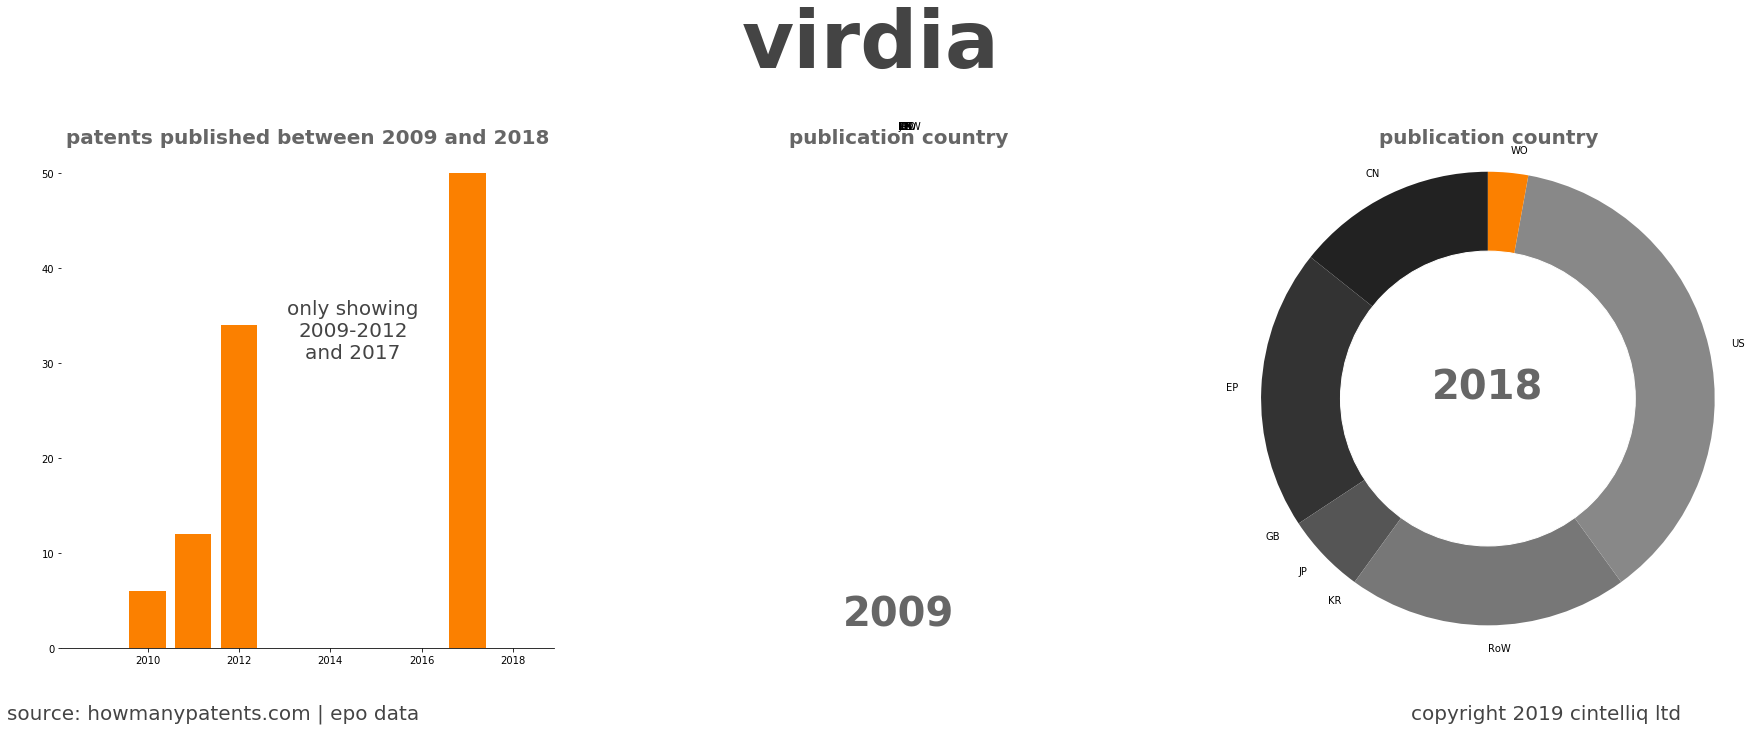 summary of patents for Virdia